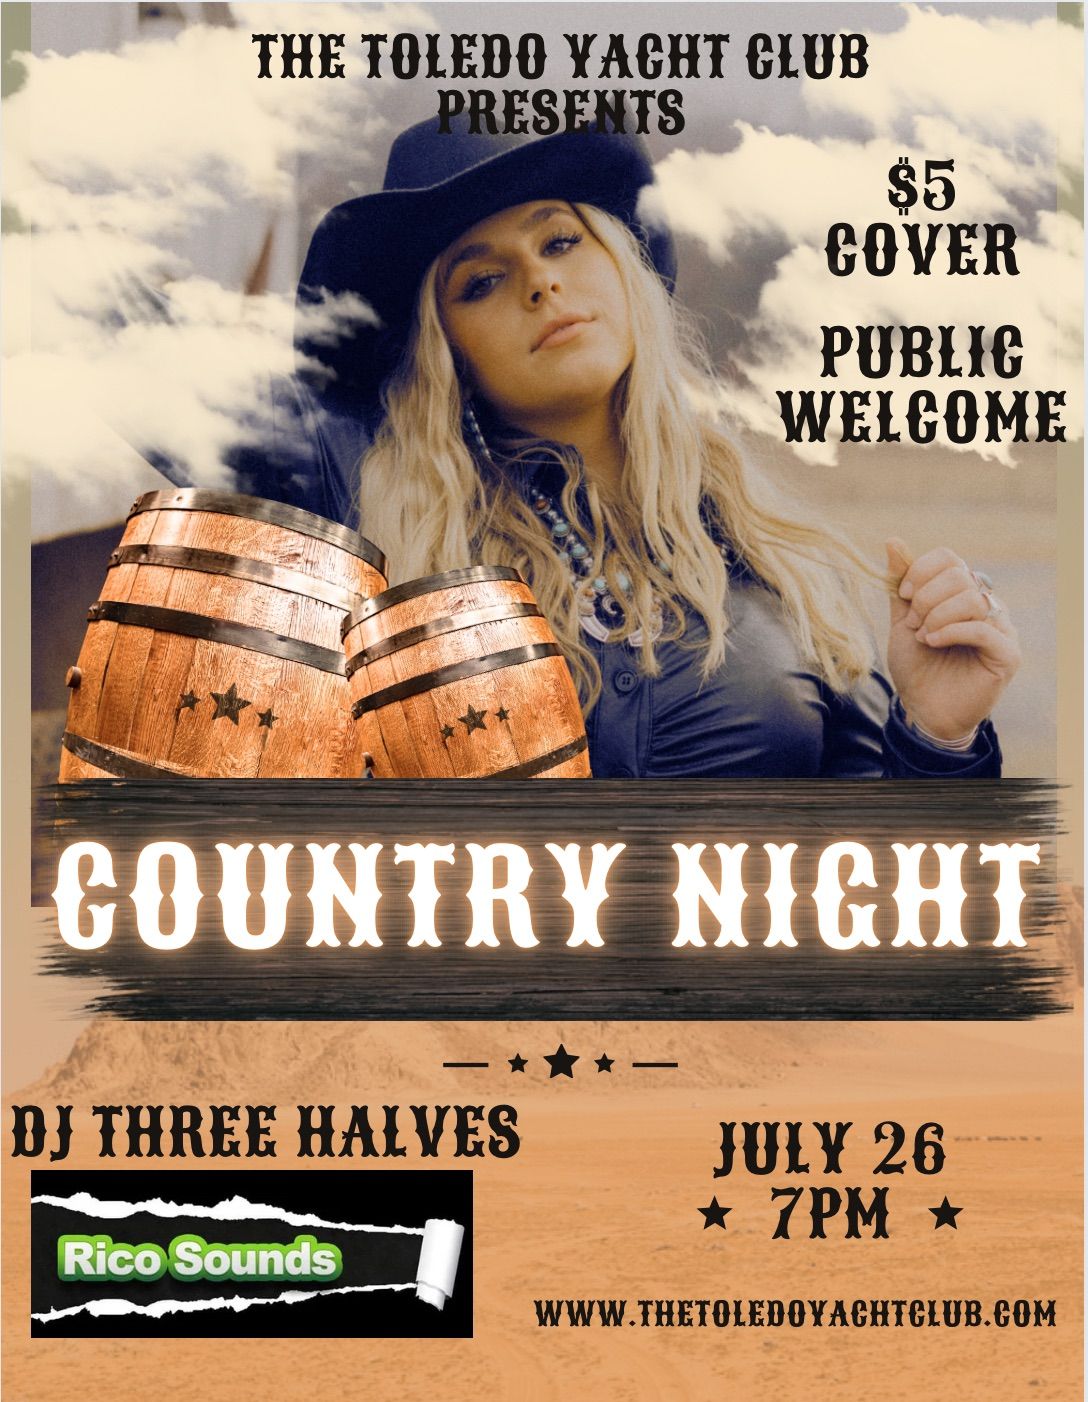 Country Night - OPEN TO THE PUBLIC - $5 Cover